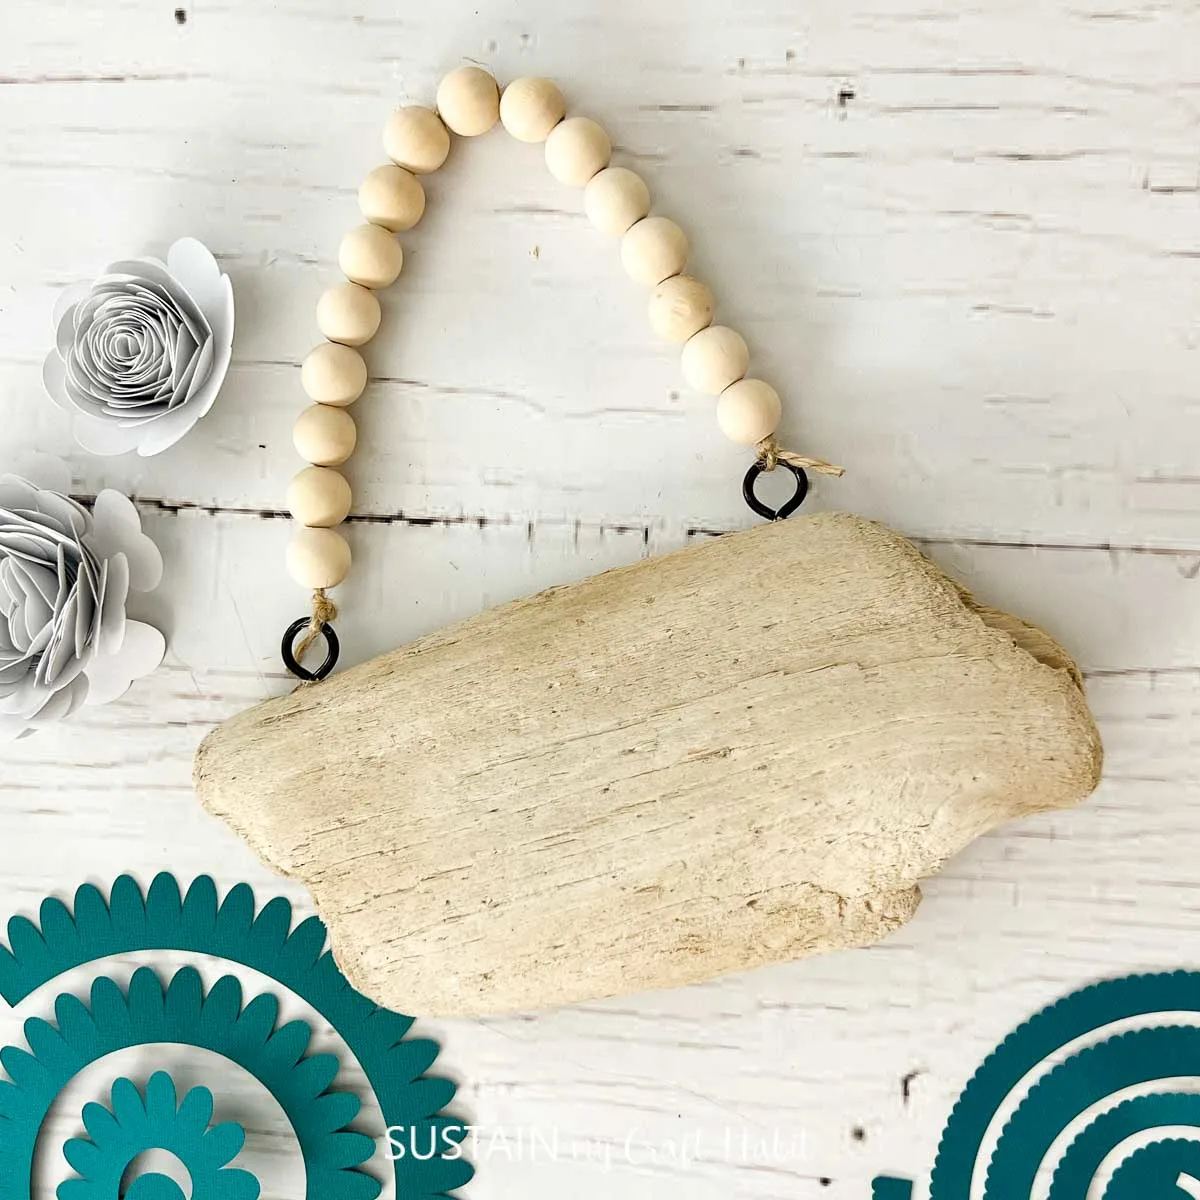 piece of driftwood with a wooden bead hanger